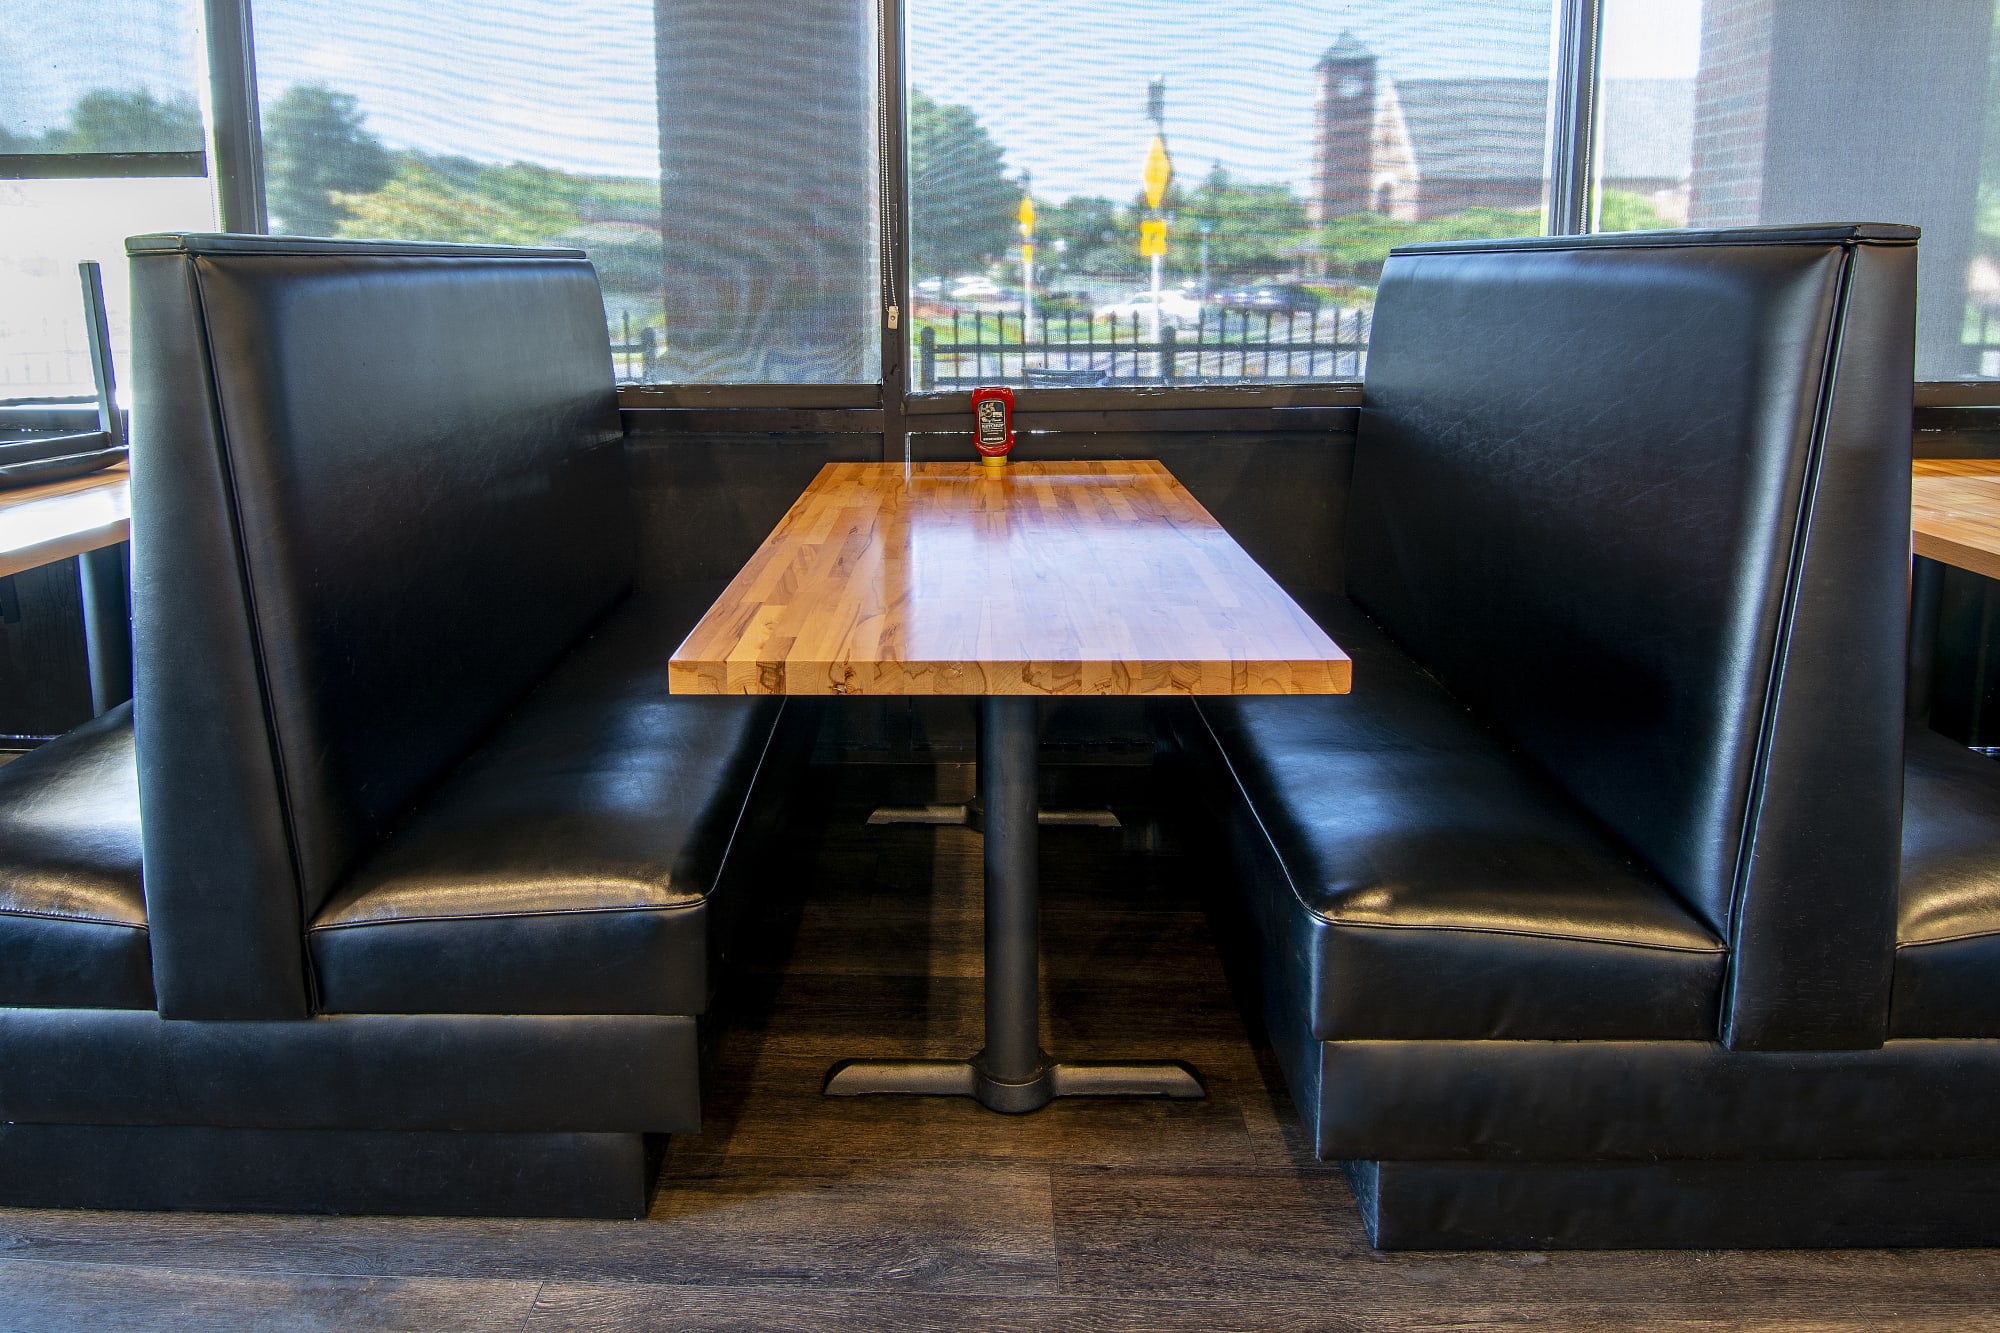 Custom Restaurant Banquette Booths: Design and Manufacturing Services –  TableBaseDepot